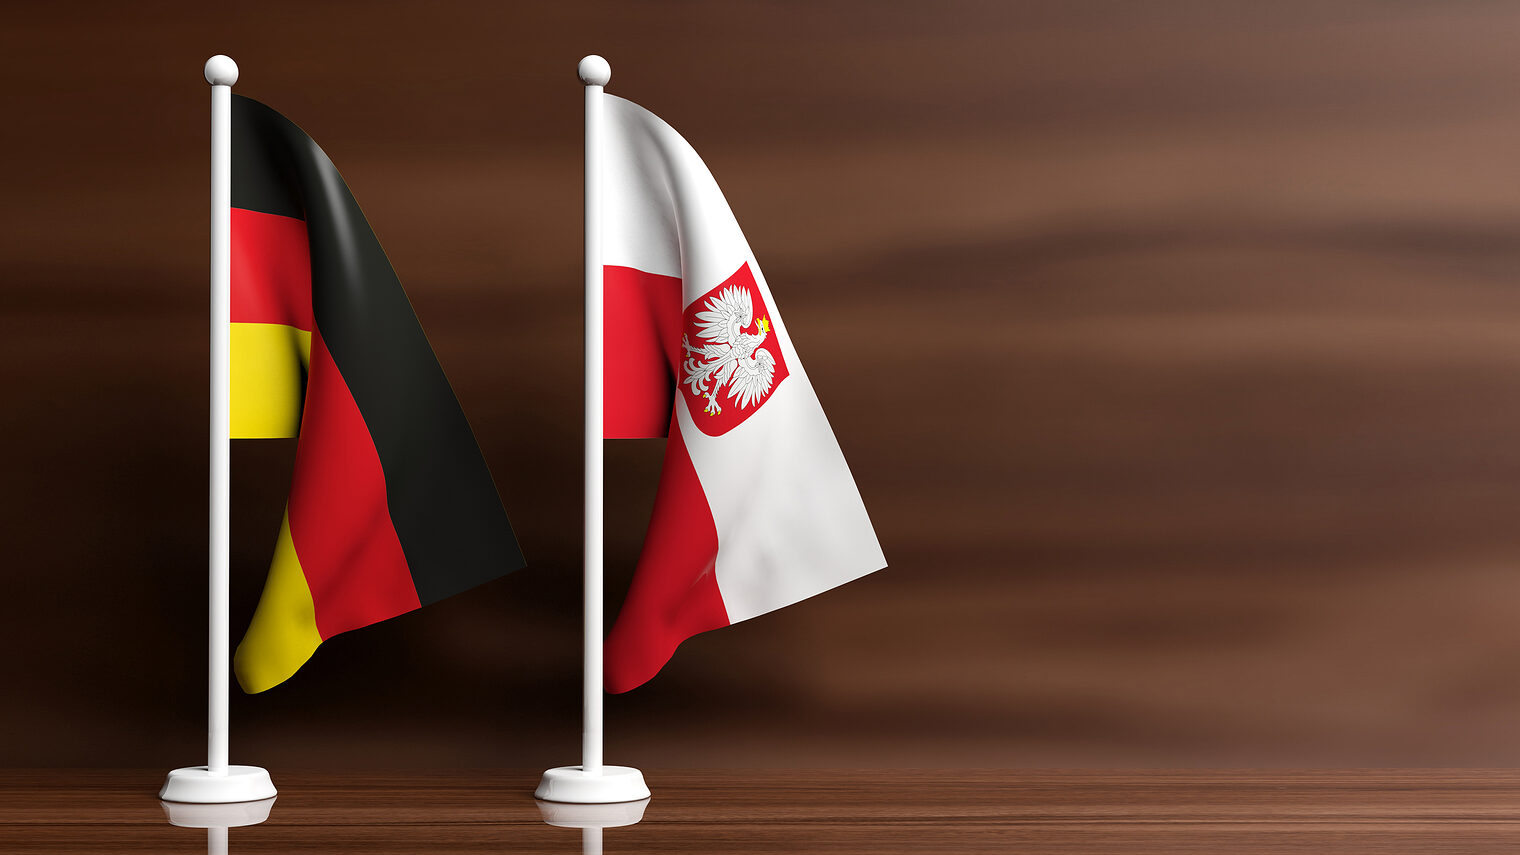 Poland and Germany miniature flags on wooden background. 3d illustration Schlagwort(e): germany, poland, flags, meeting, alliance, economy, polish, germ, germany, poland, flags, meeting, alliance, economy, polish, german, support, help, national, illustration, nation, friendship, sign, world, cooperation, banner, symbol, country, waving, background, flag, miniature, small, politics, global, international, patriotism, two, culture, wooden, wood, communication, partnership, relation, copyspace, space, copy